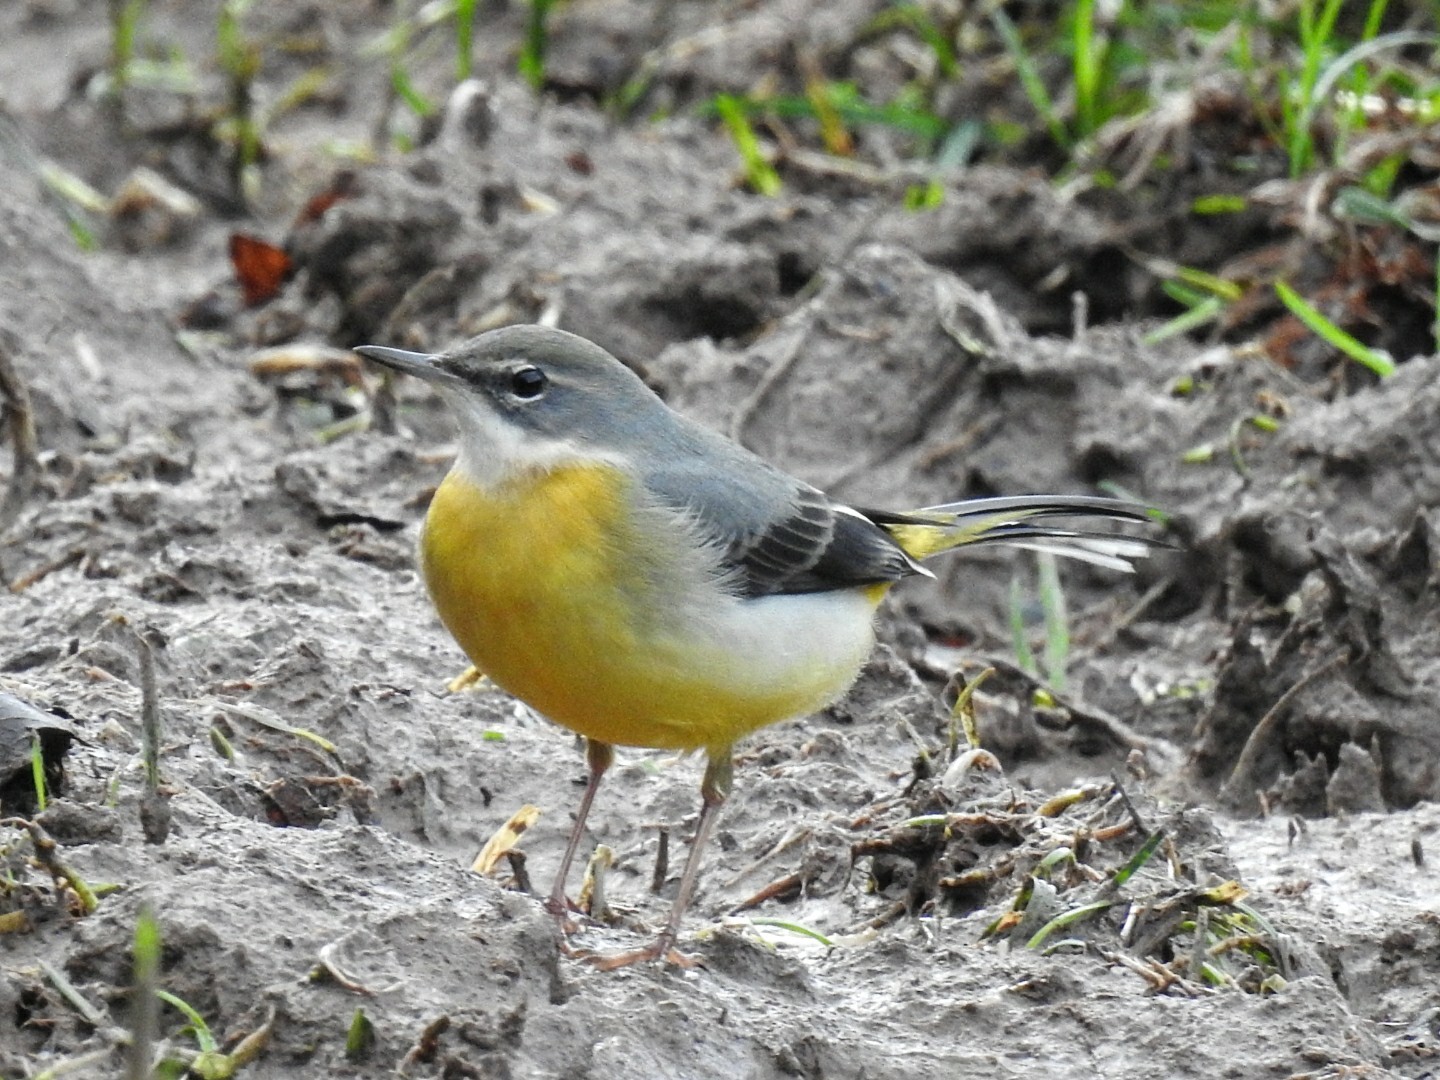 COLOUR CONFUSION: The grey wagtail is sometimes confused with the yellow wagtail due to the vibrantly coloured upperparts